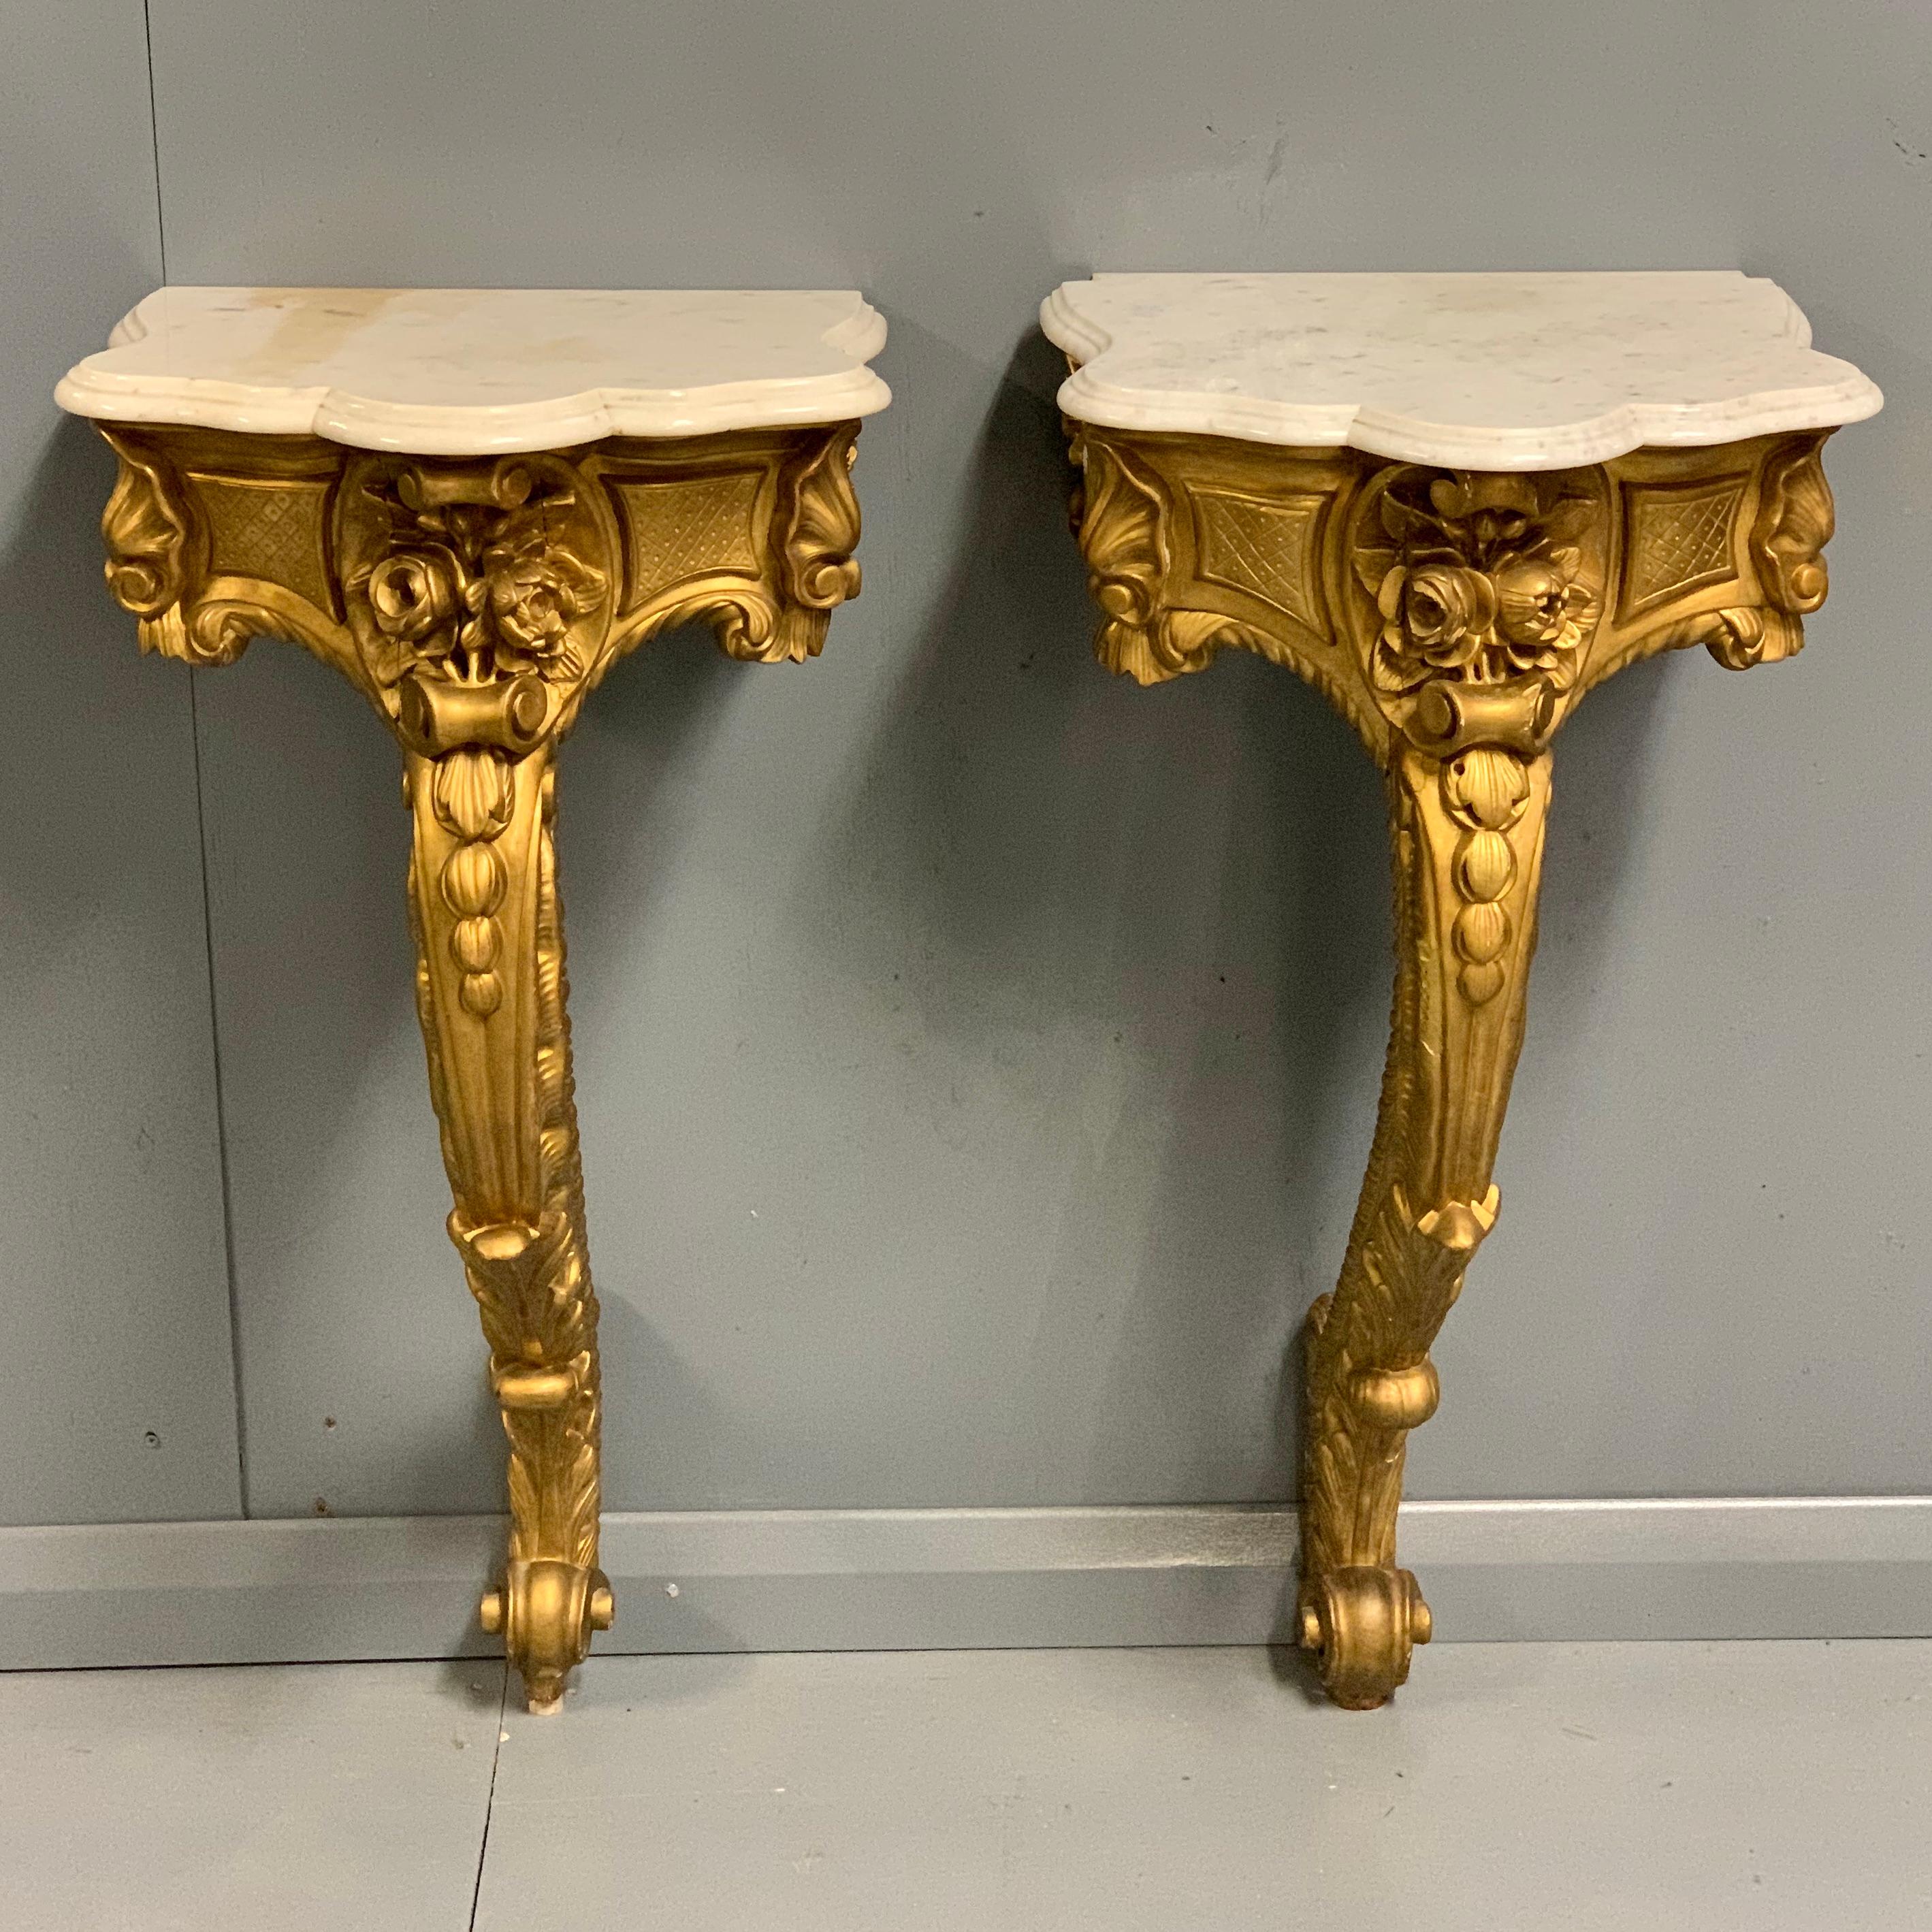 19th Century French Pair of Gilt Wall Mounted Console Tables with Marble Tops In Good Condition For Sale In Uppingham, Rutland